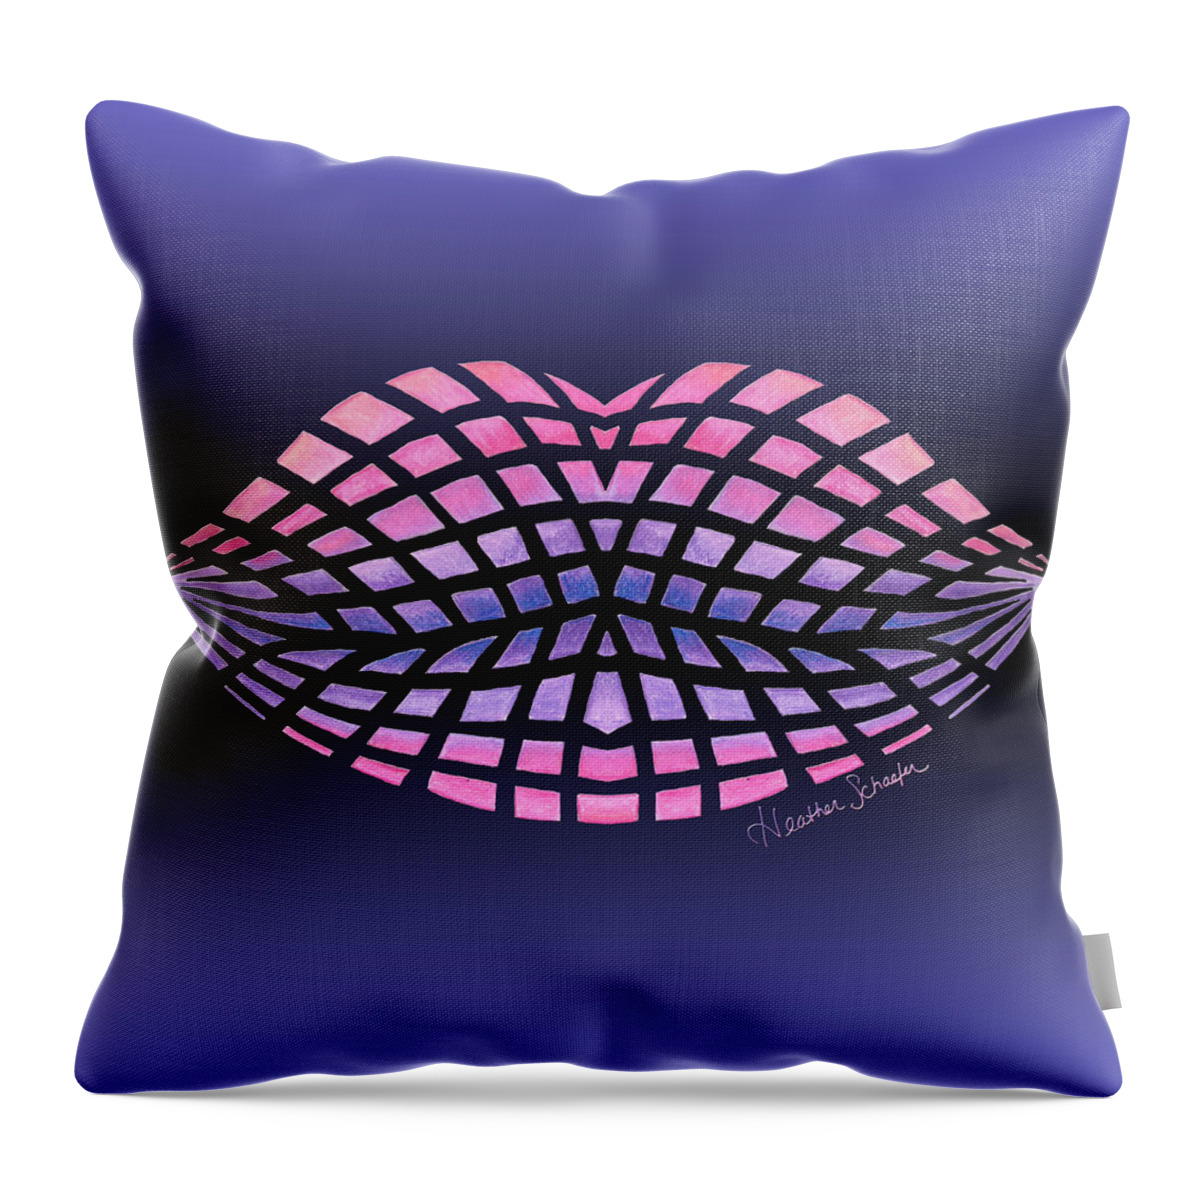 Vasarely Throw Pillow featuring the drawing Vasarely Style Lips by Heather Schaefer